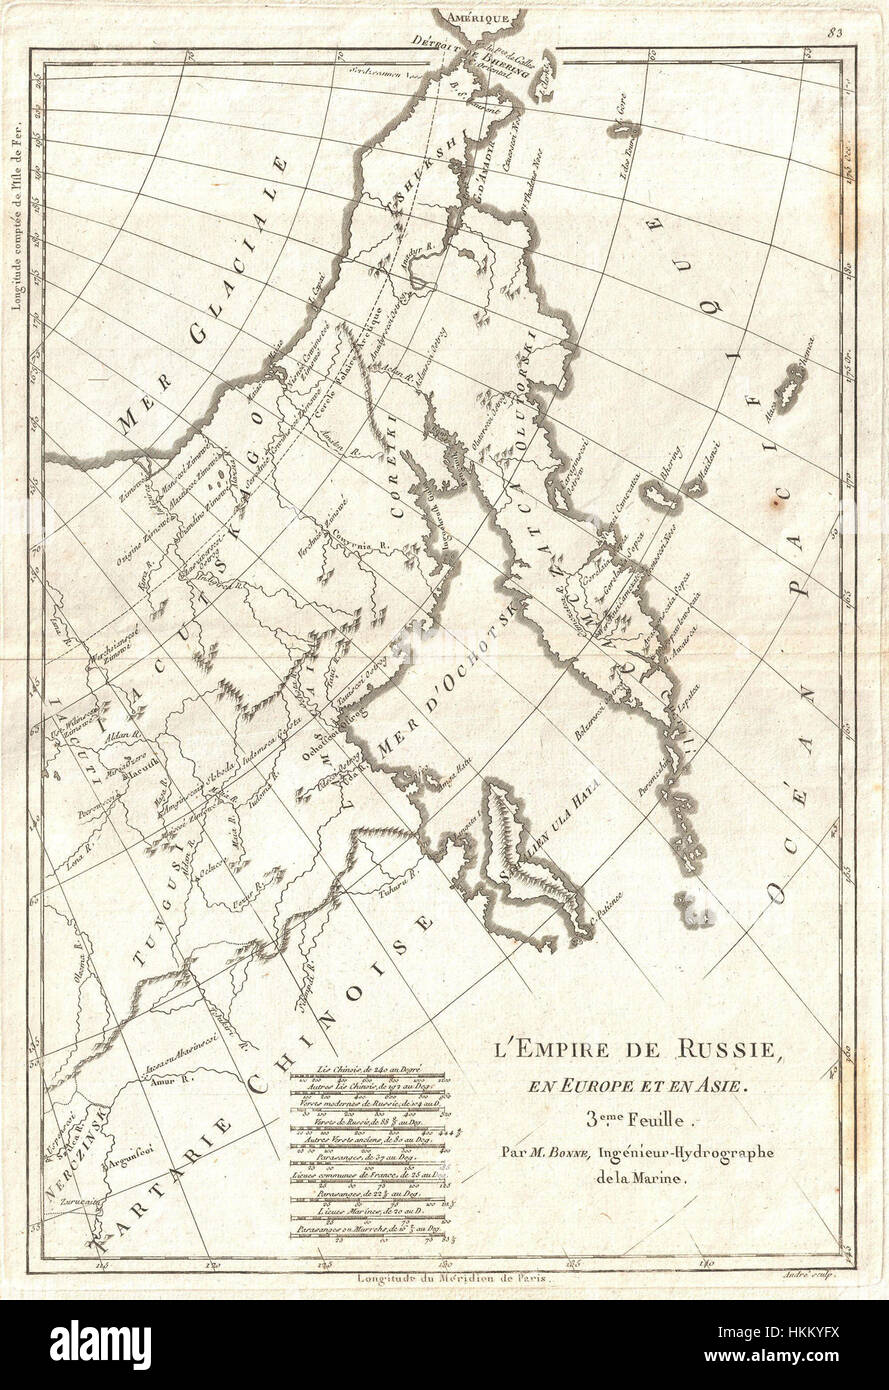 1780 Bellin Map of Eastern Russia, Tartary, and the Bering Strait - Geographicus - EmpireRussie3-bonne-1780 Stock Photo